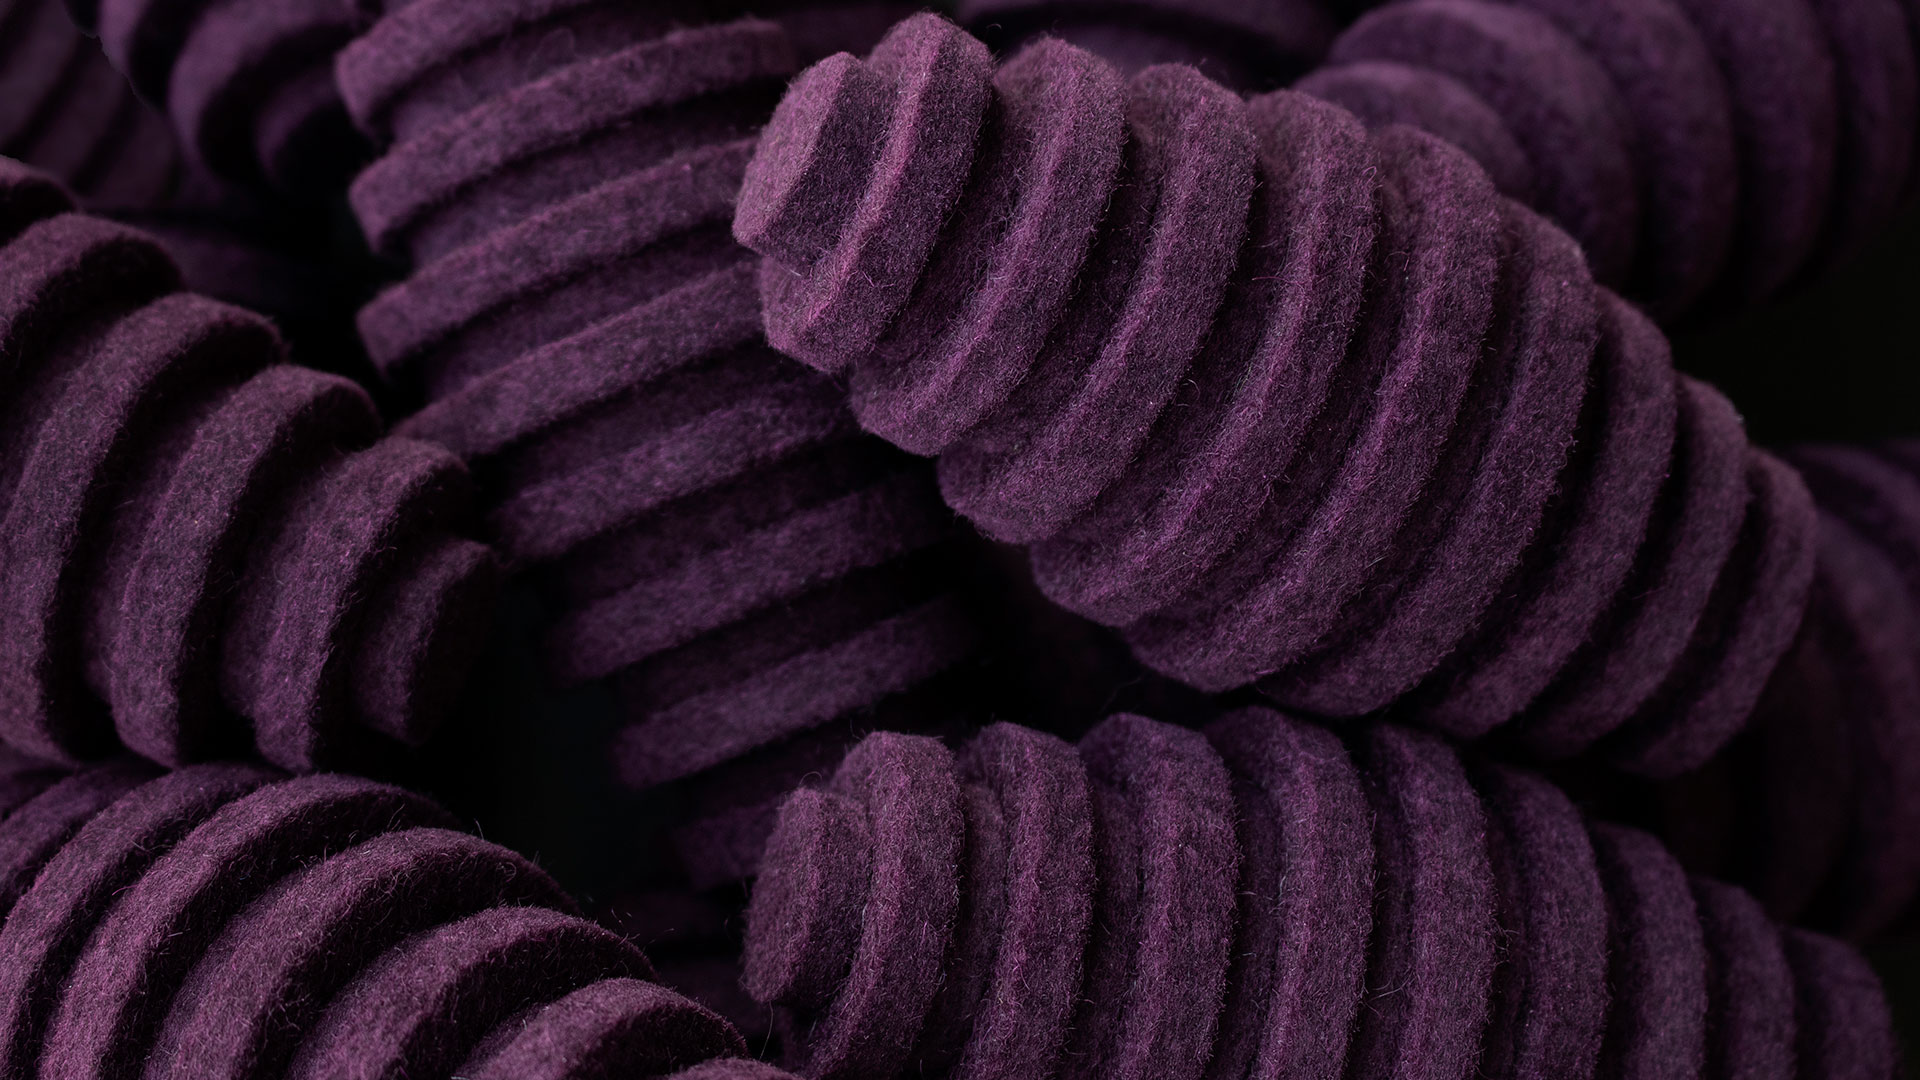 Closeup of pile of purple felt pods. They are oblong egg-shaped and have ridges.